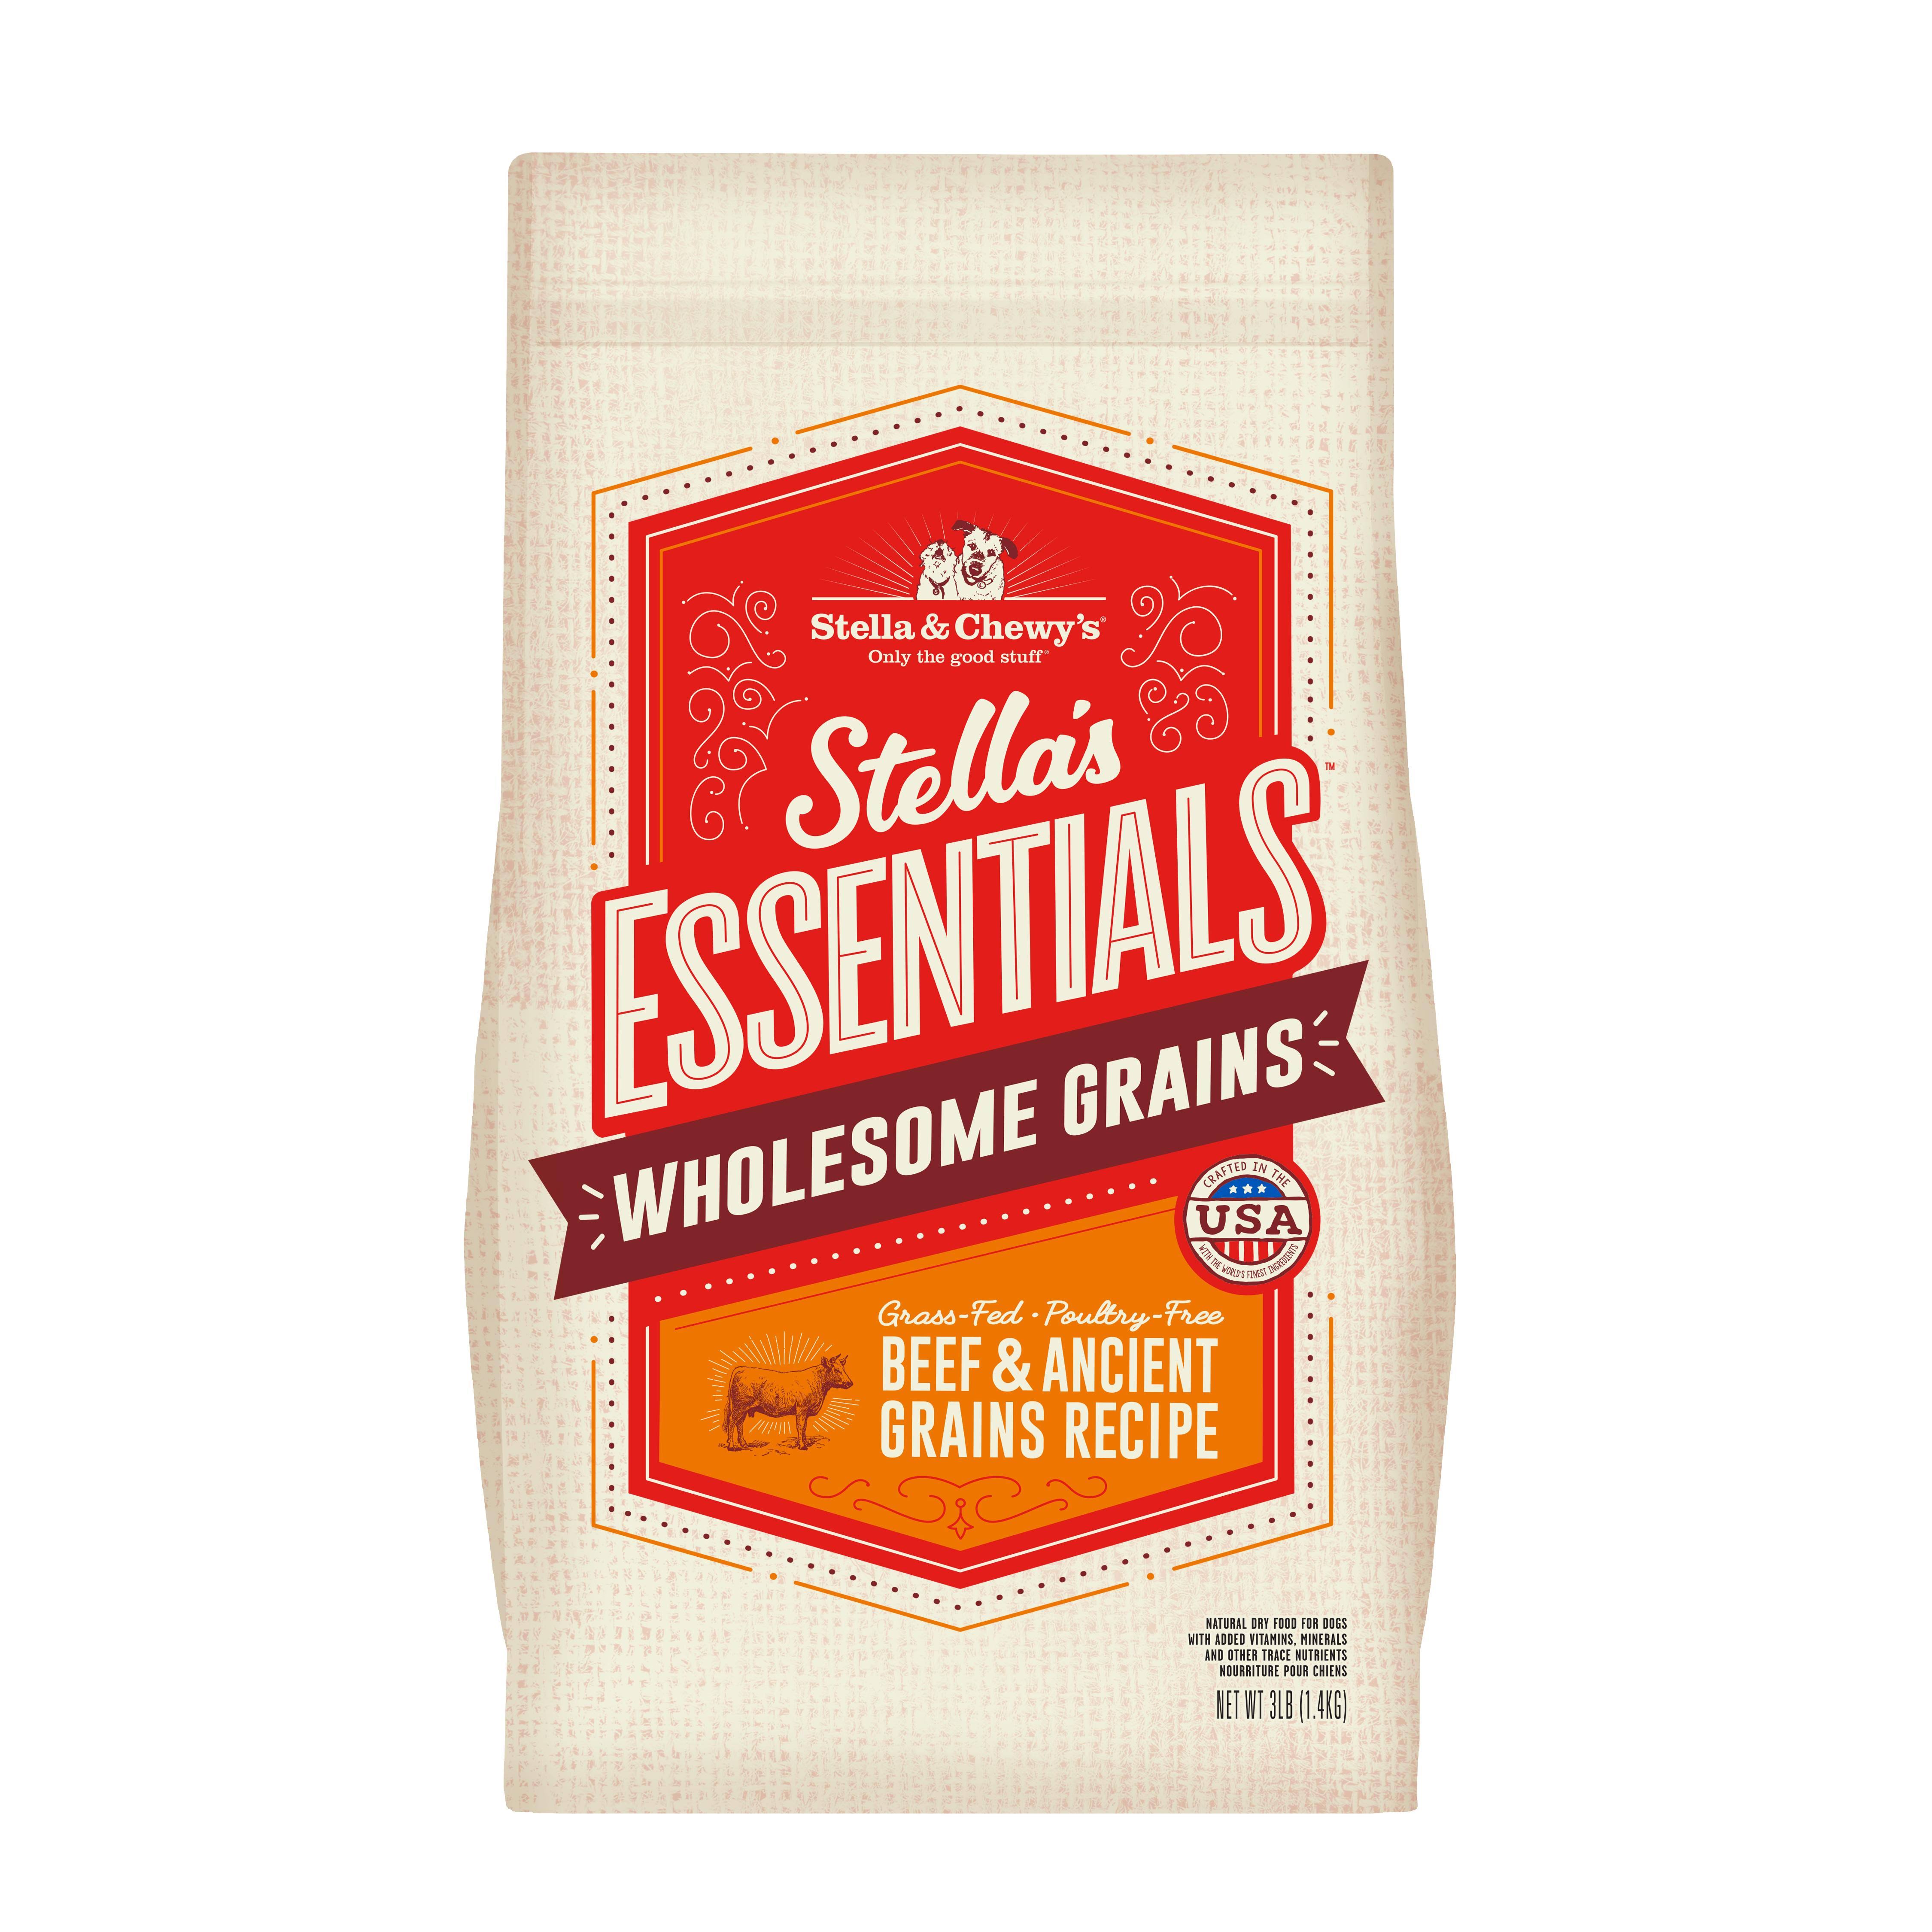 Stella & Chewy's Wholesome Grains - Beef